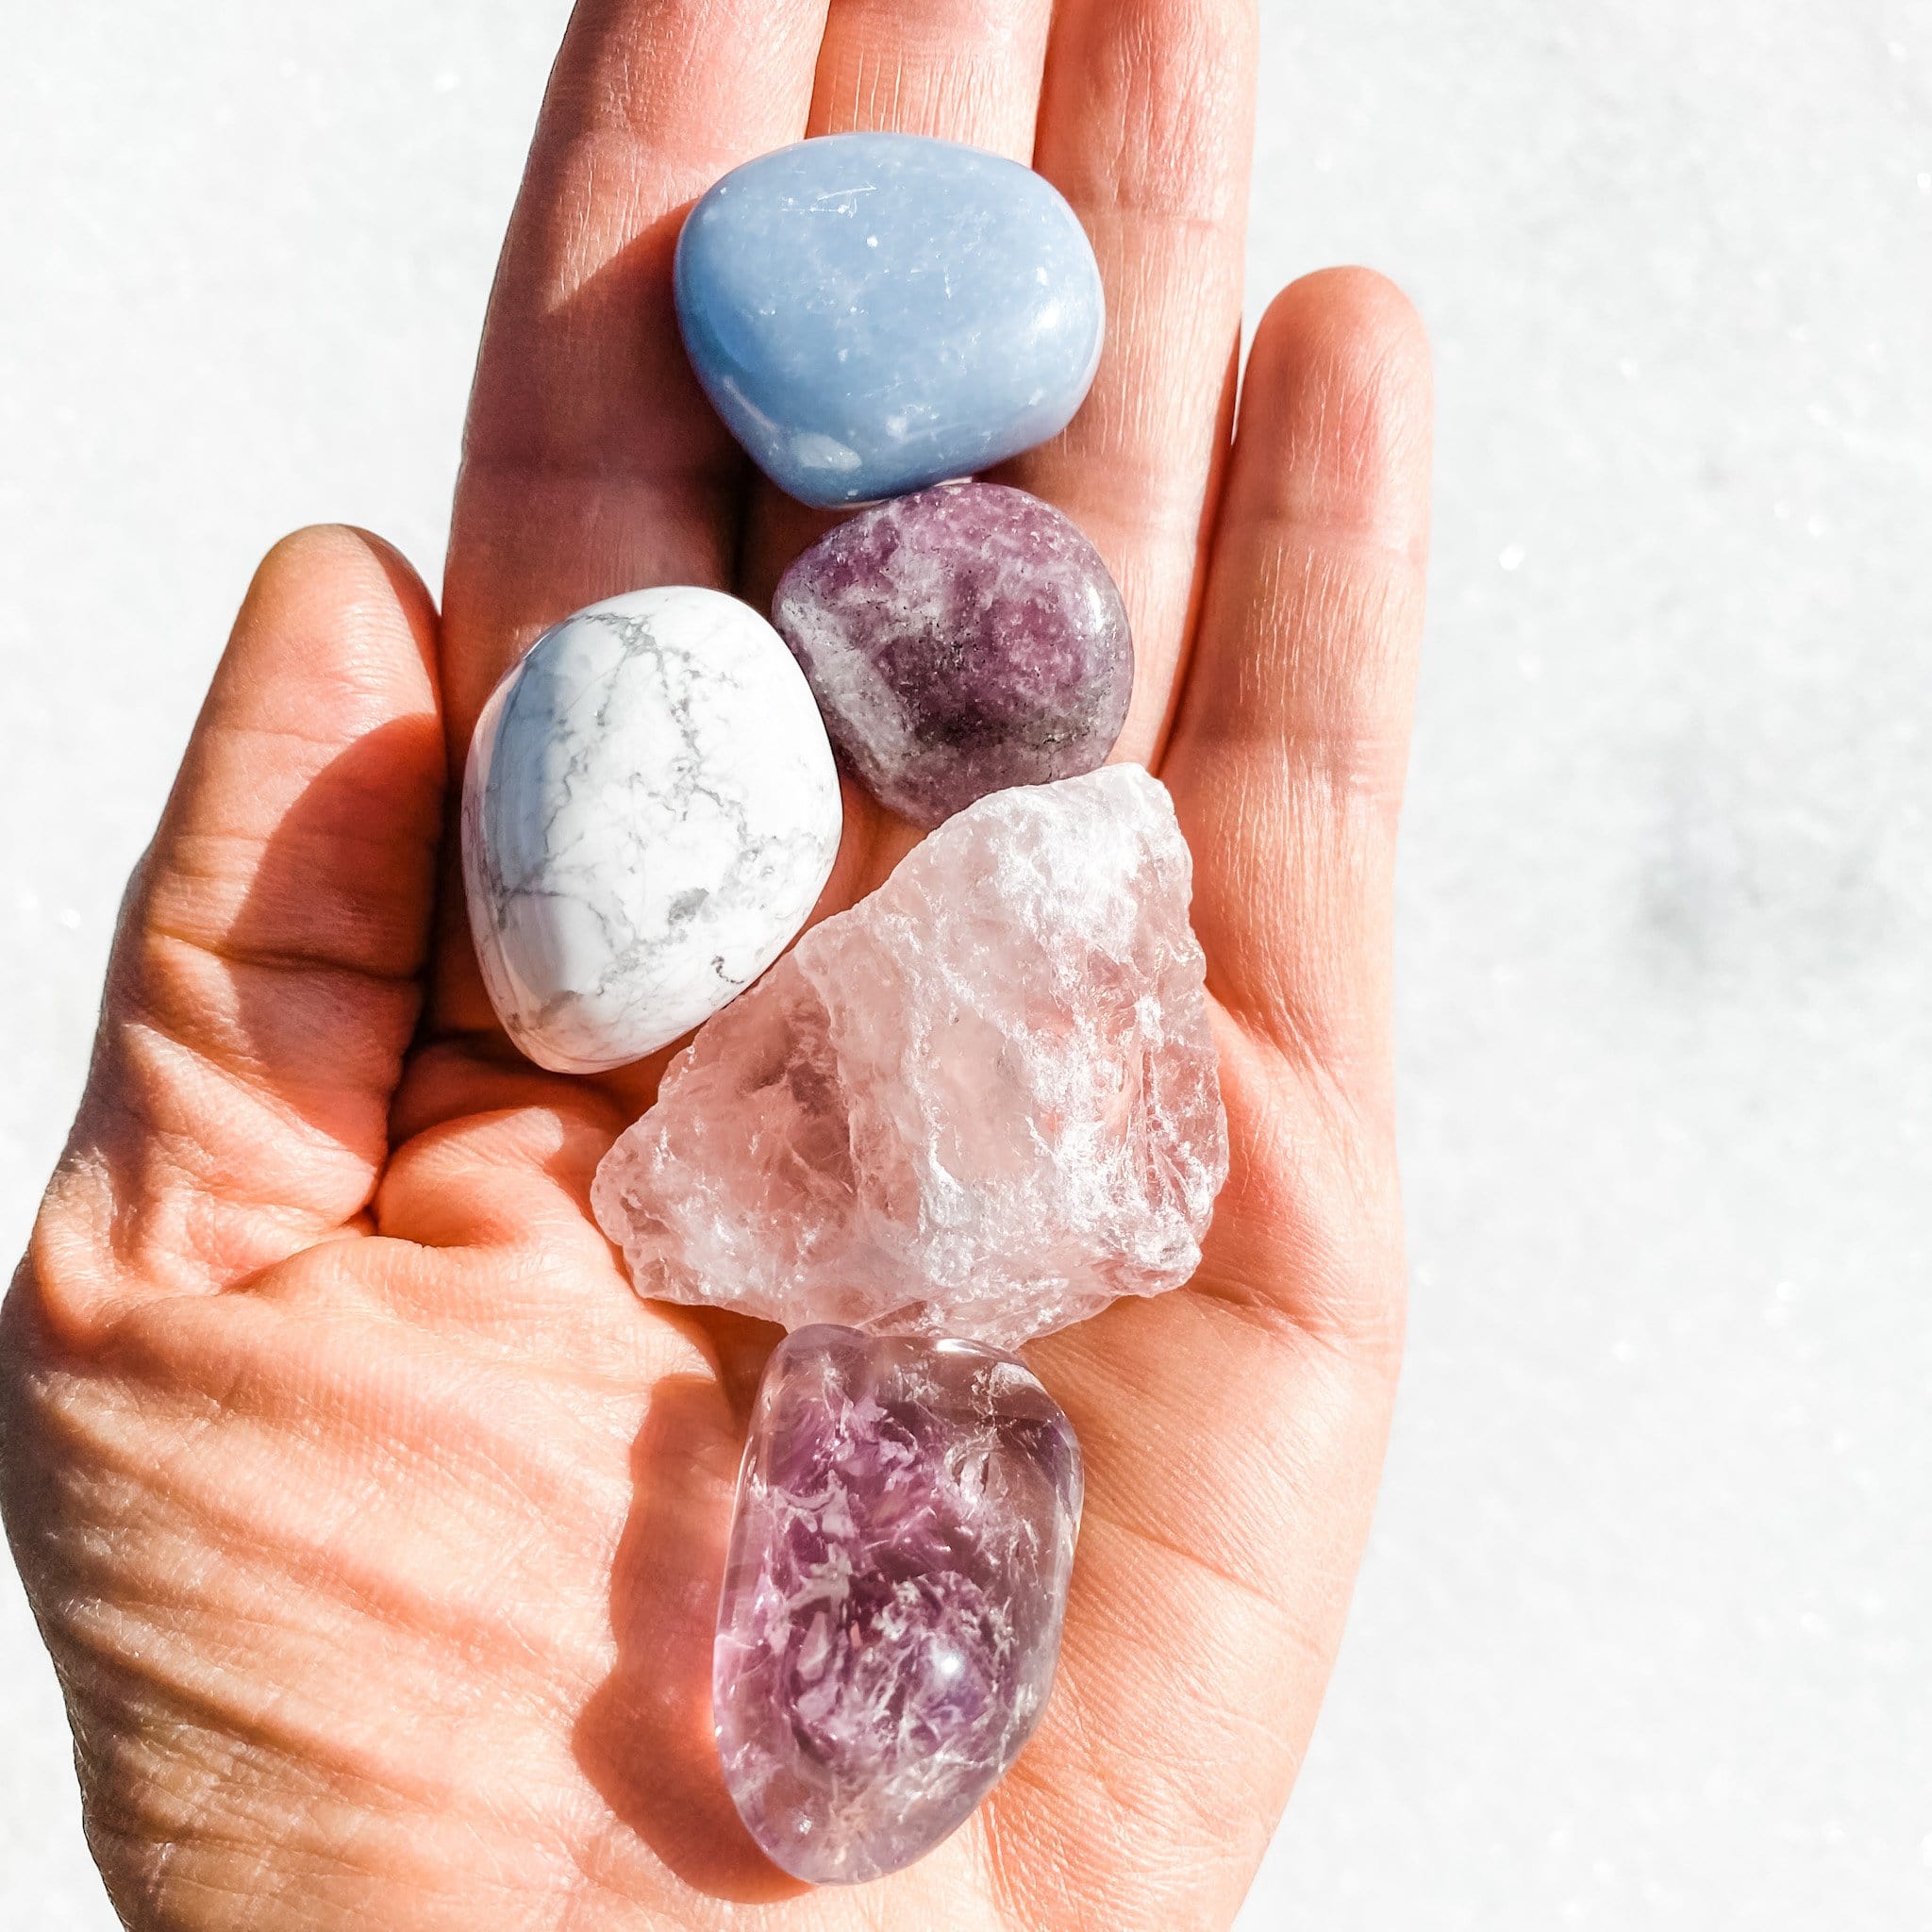 5 Healing Crystals For Beginners